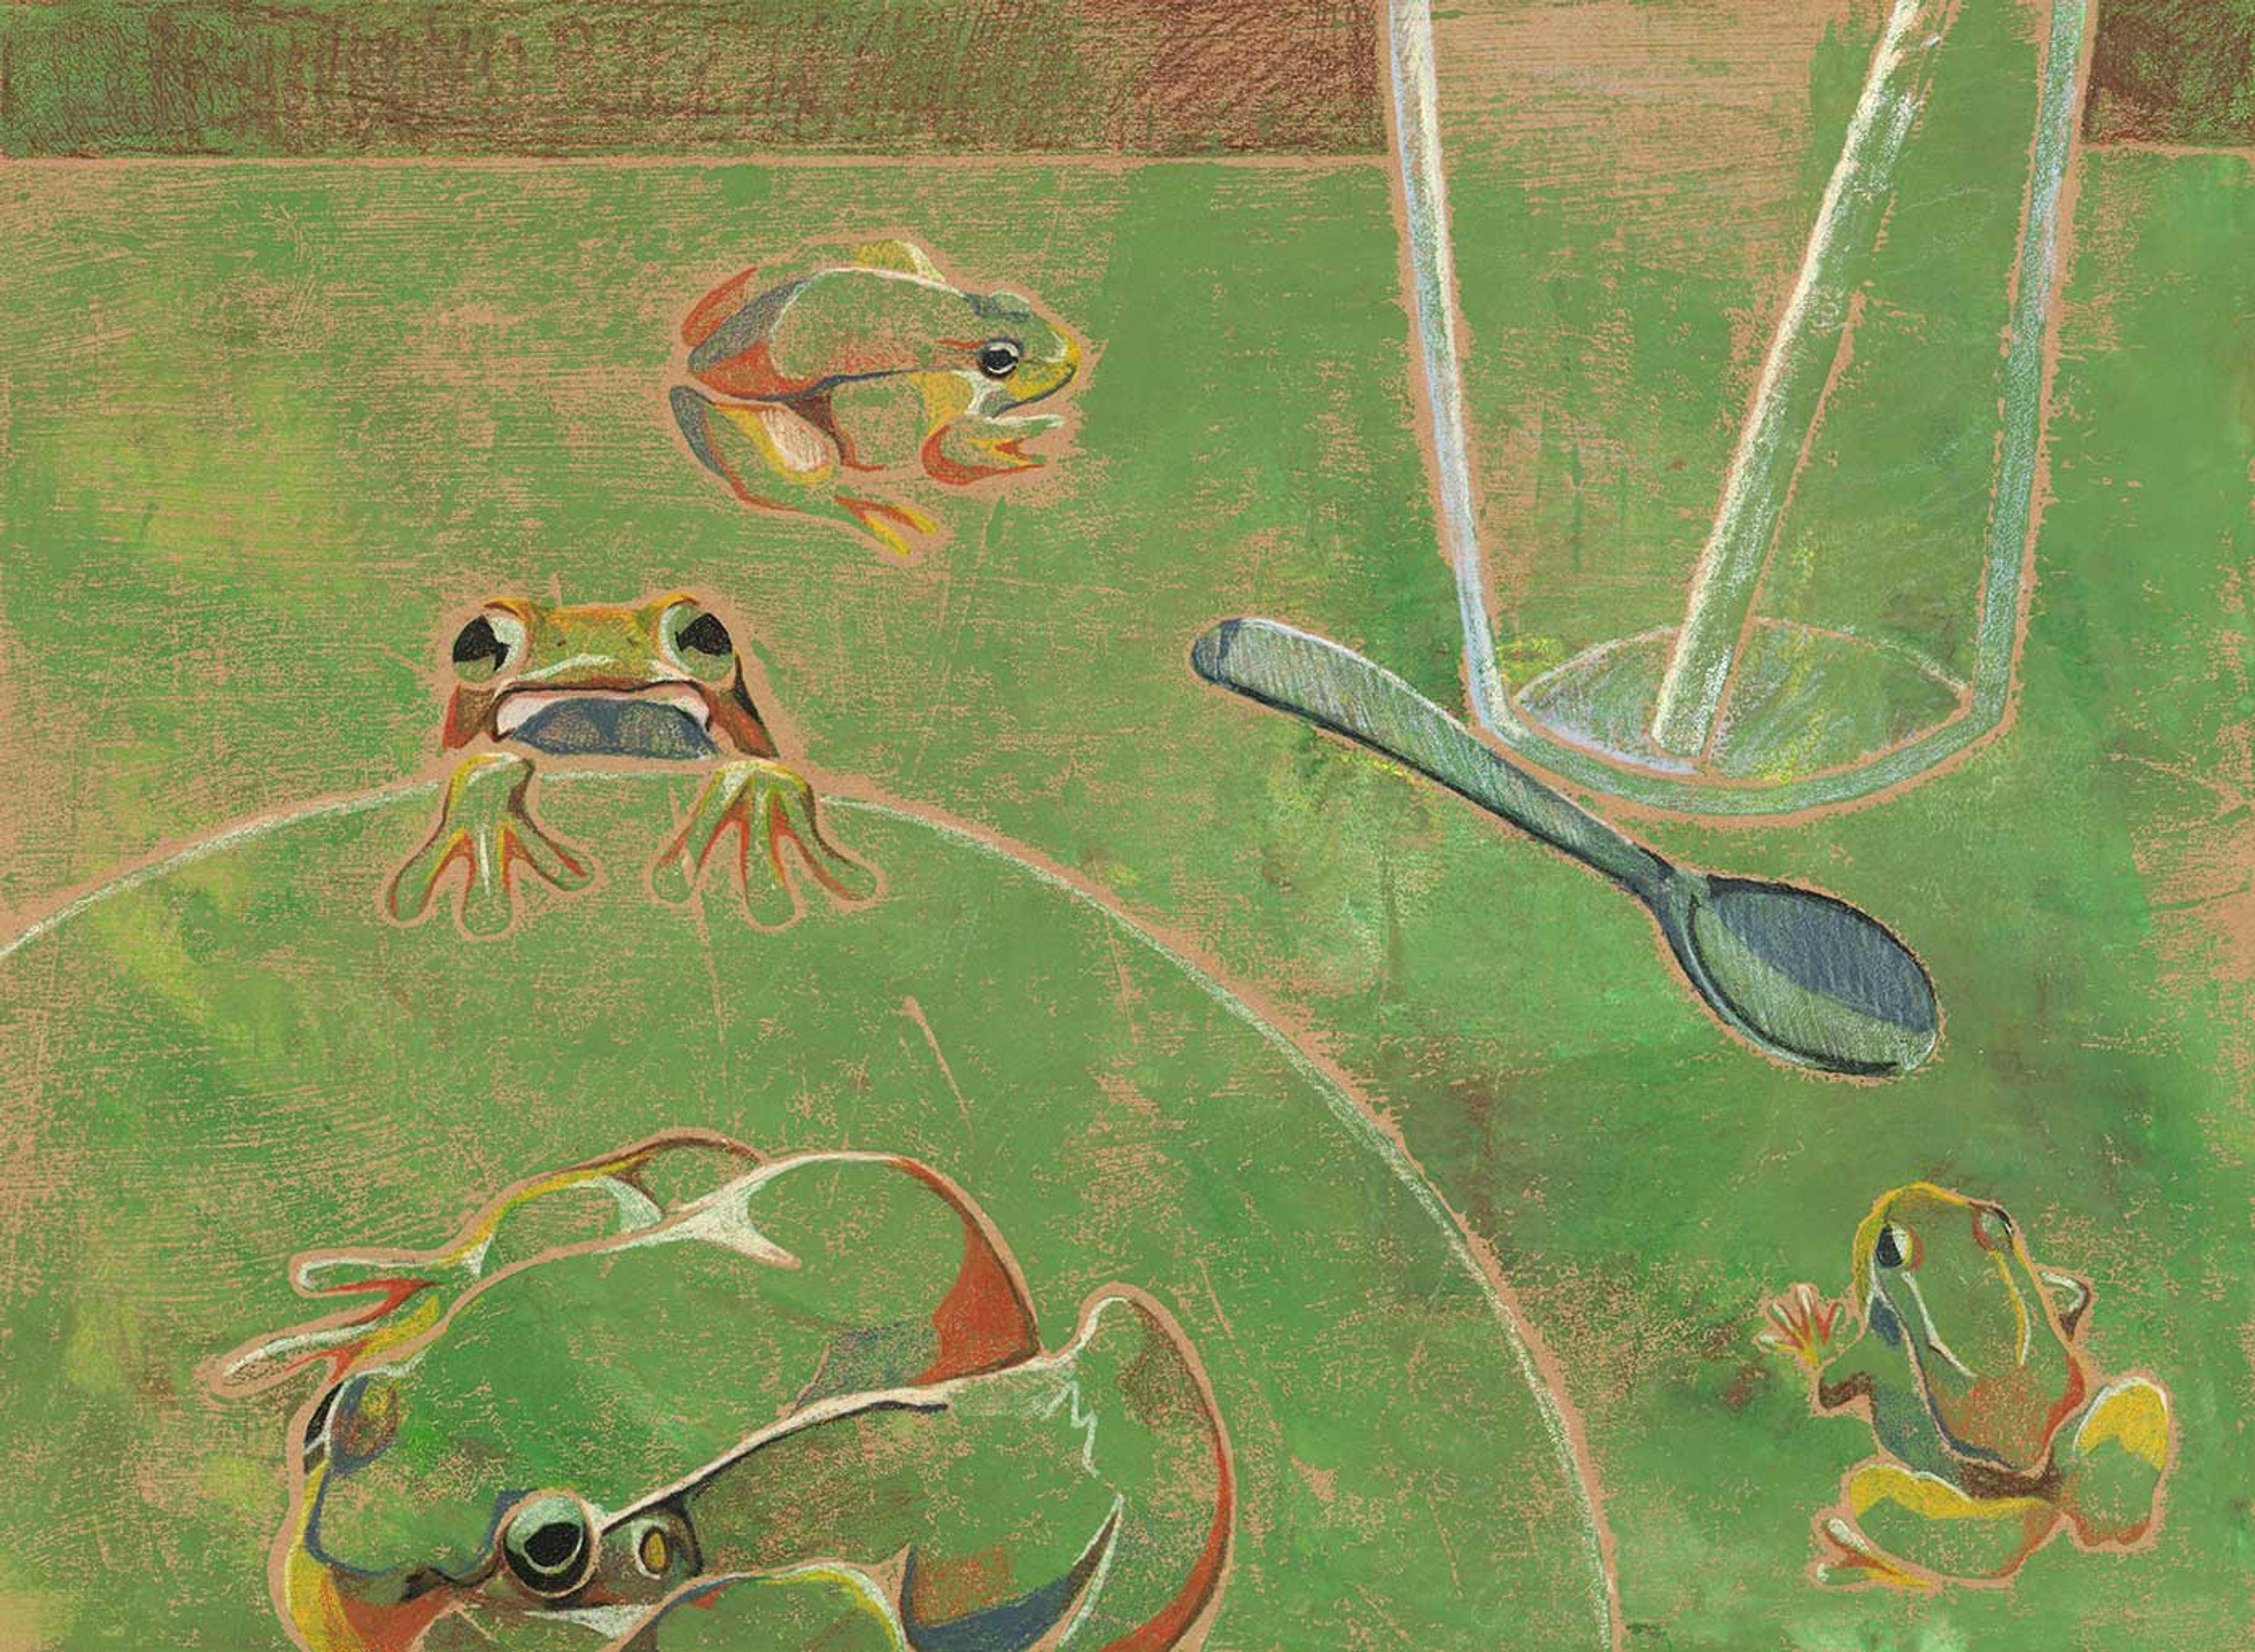 Drawing of four frogs on a green table with a plate, glass, and spoon.